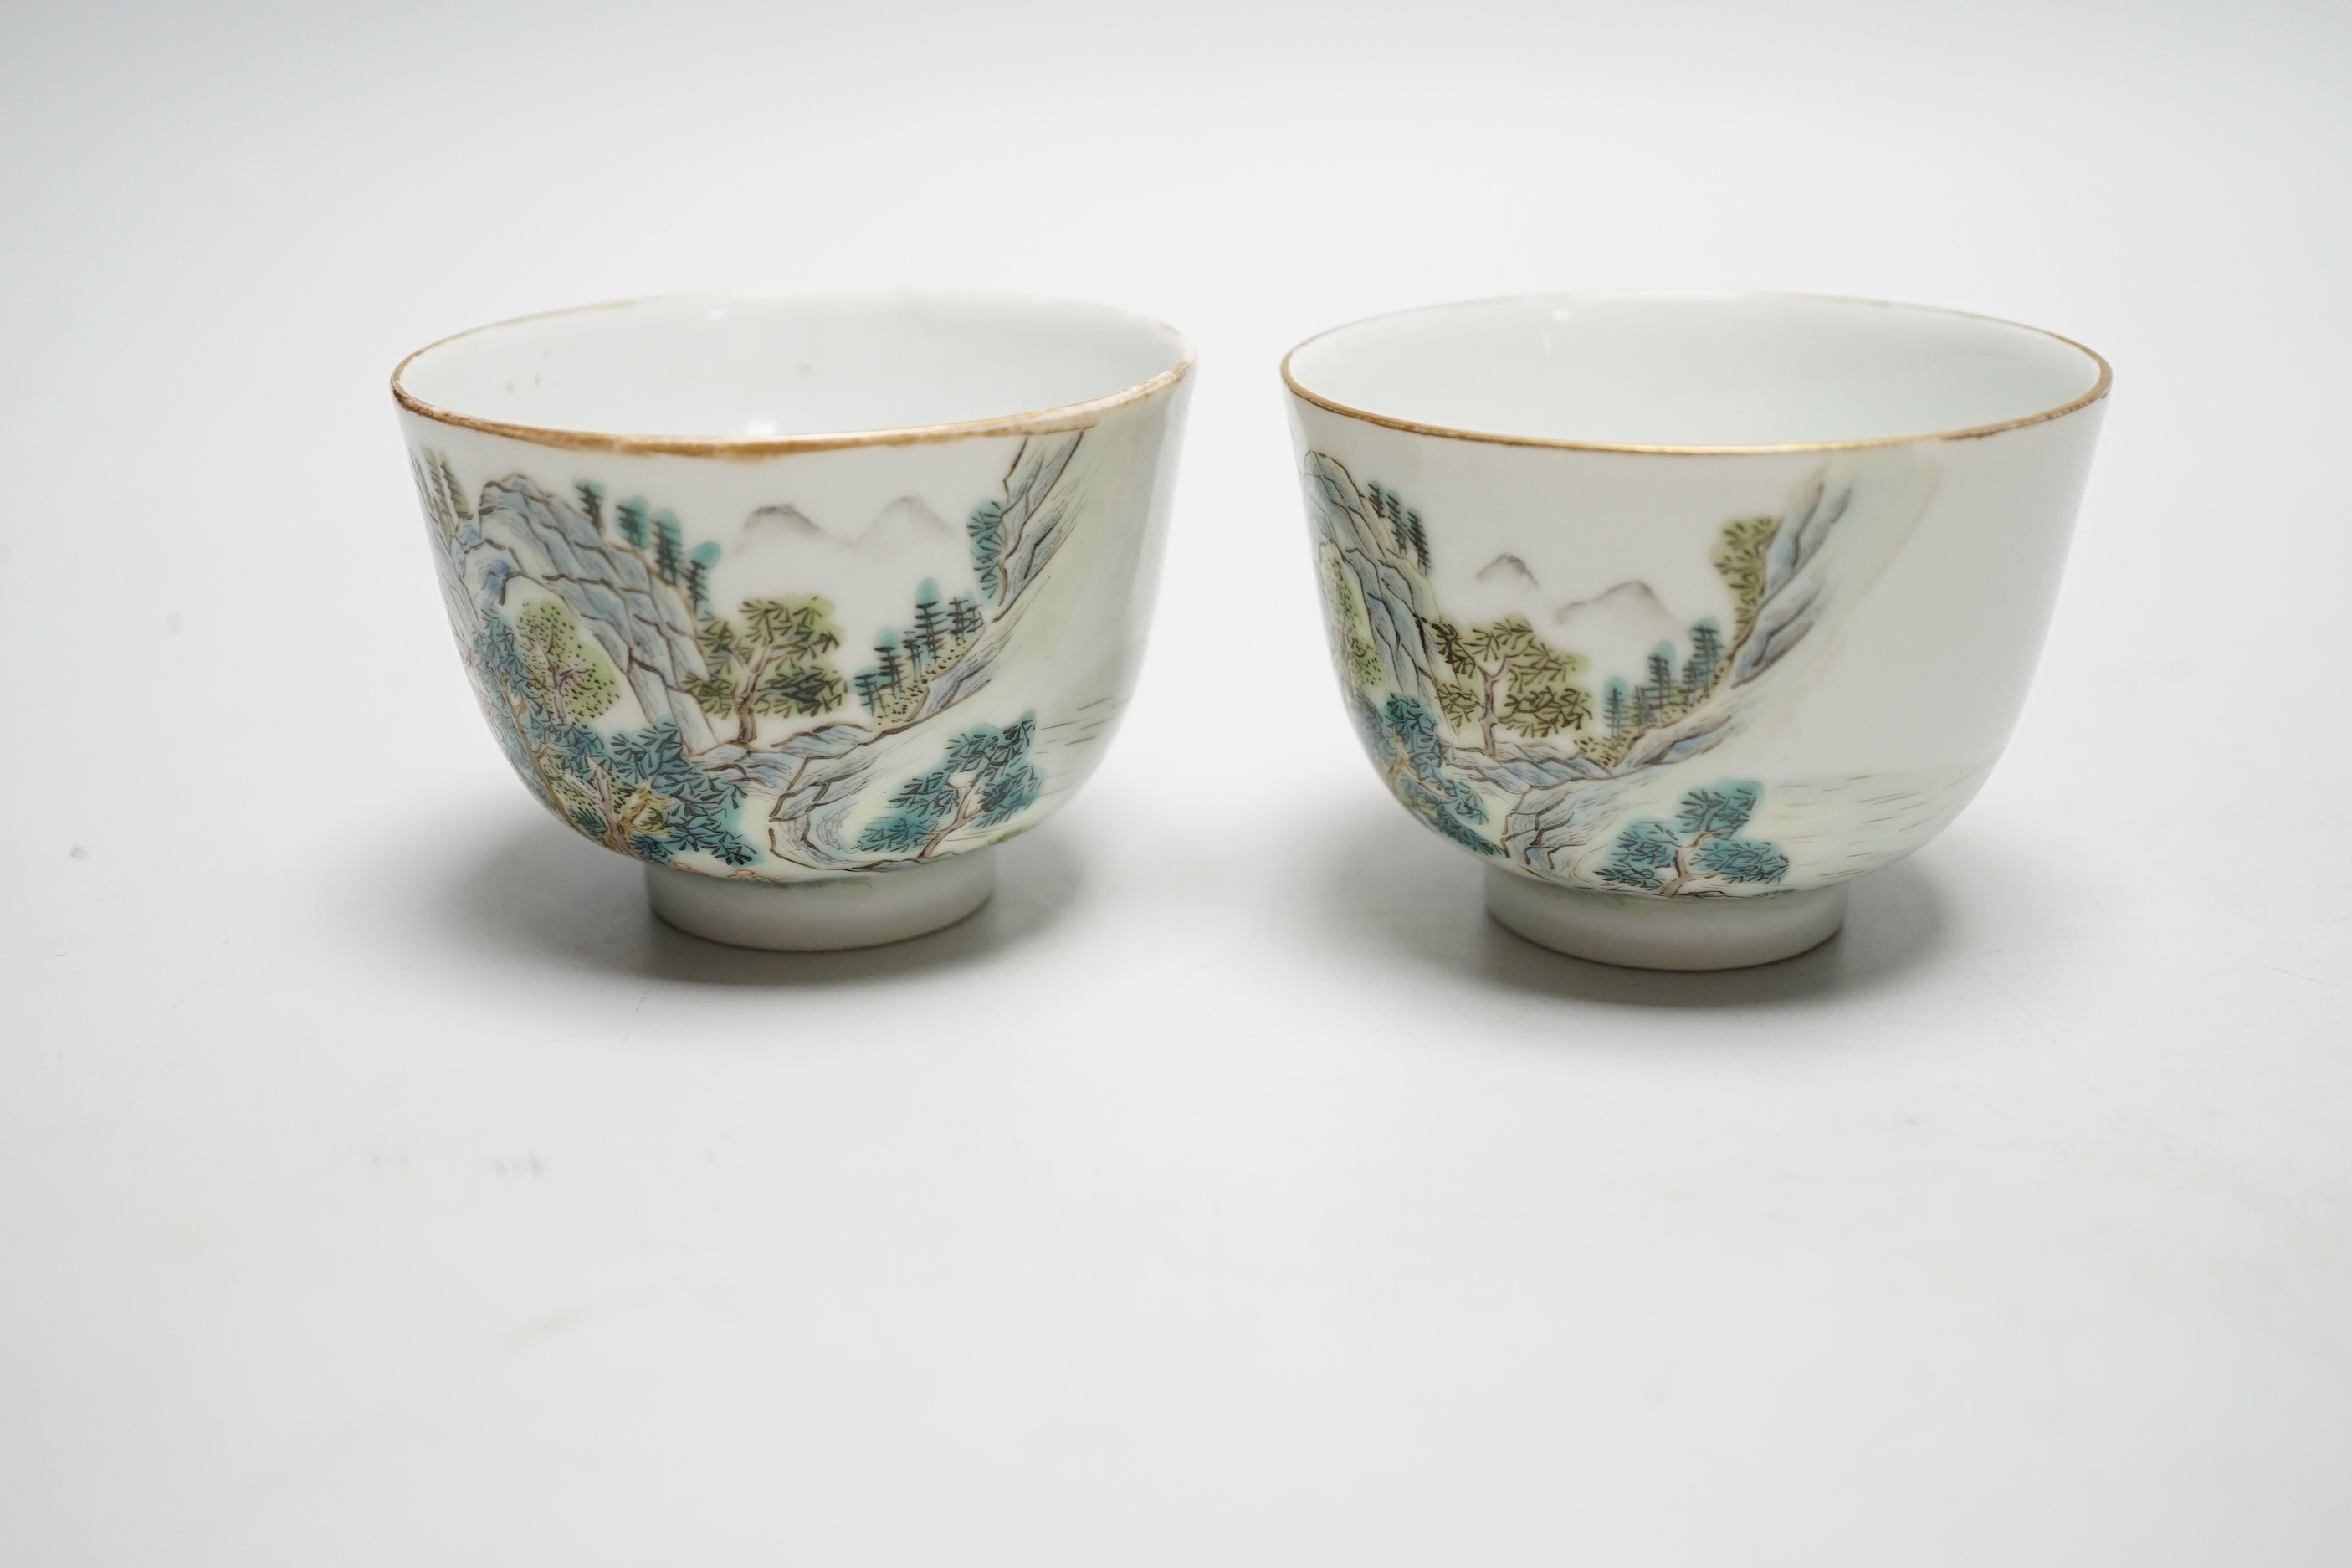 A pair of Chinese enamelled porcelain cups, landscapes and pagodas, 6cm tall